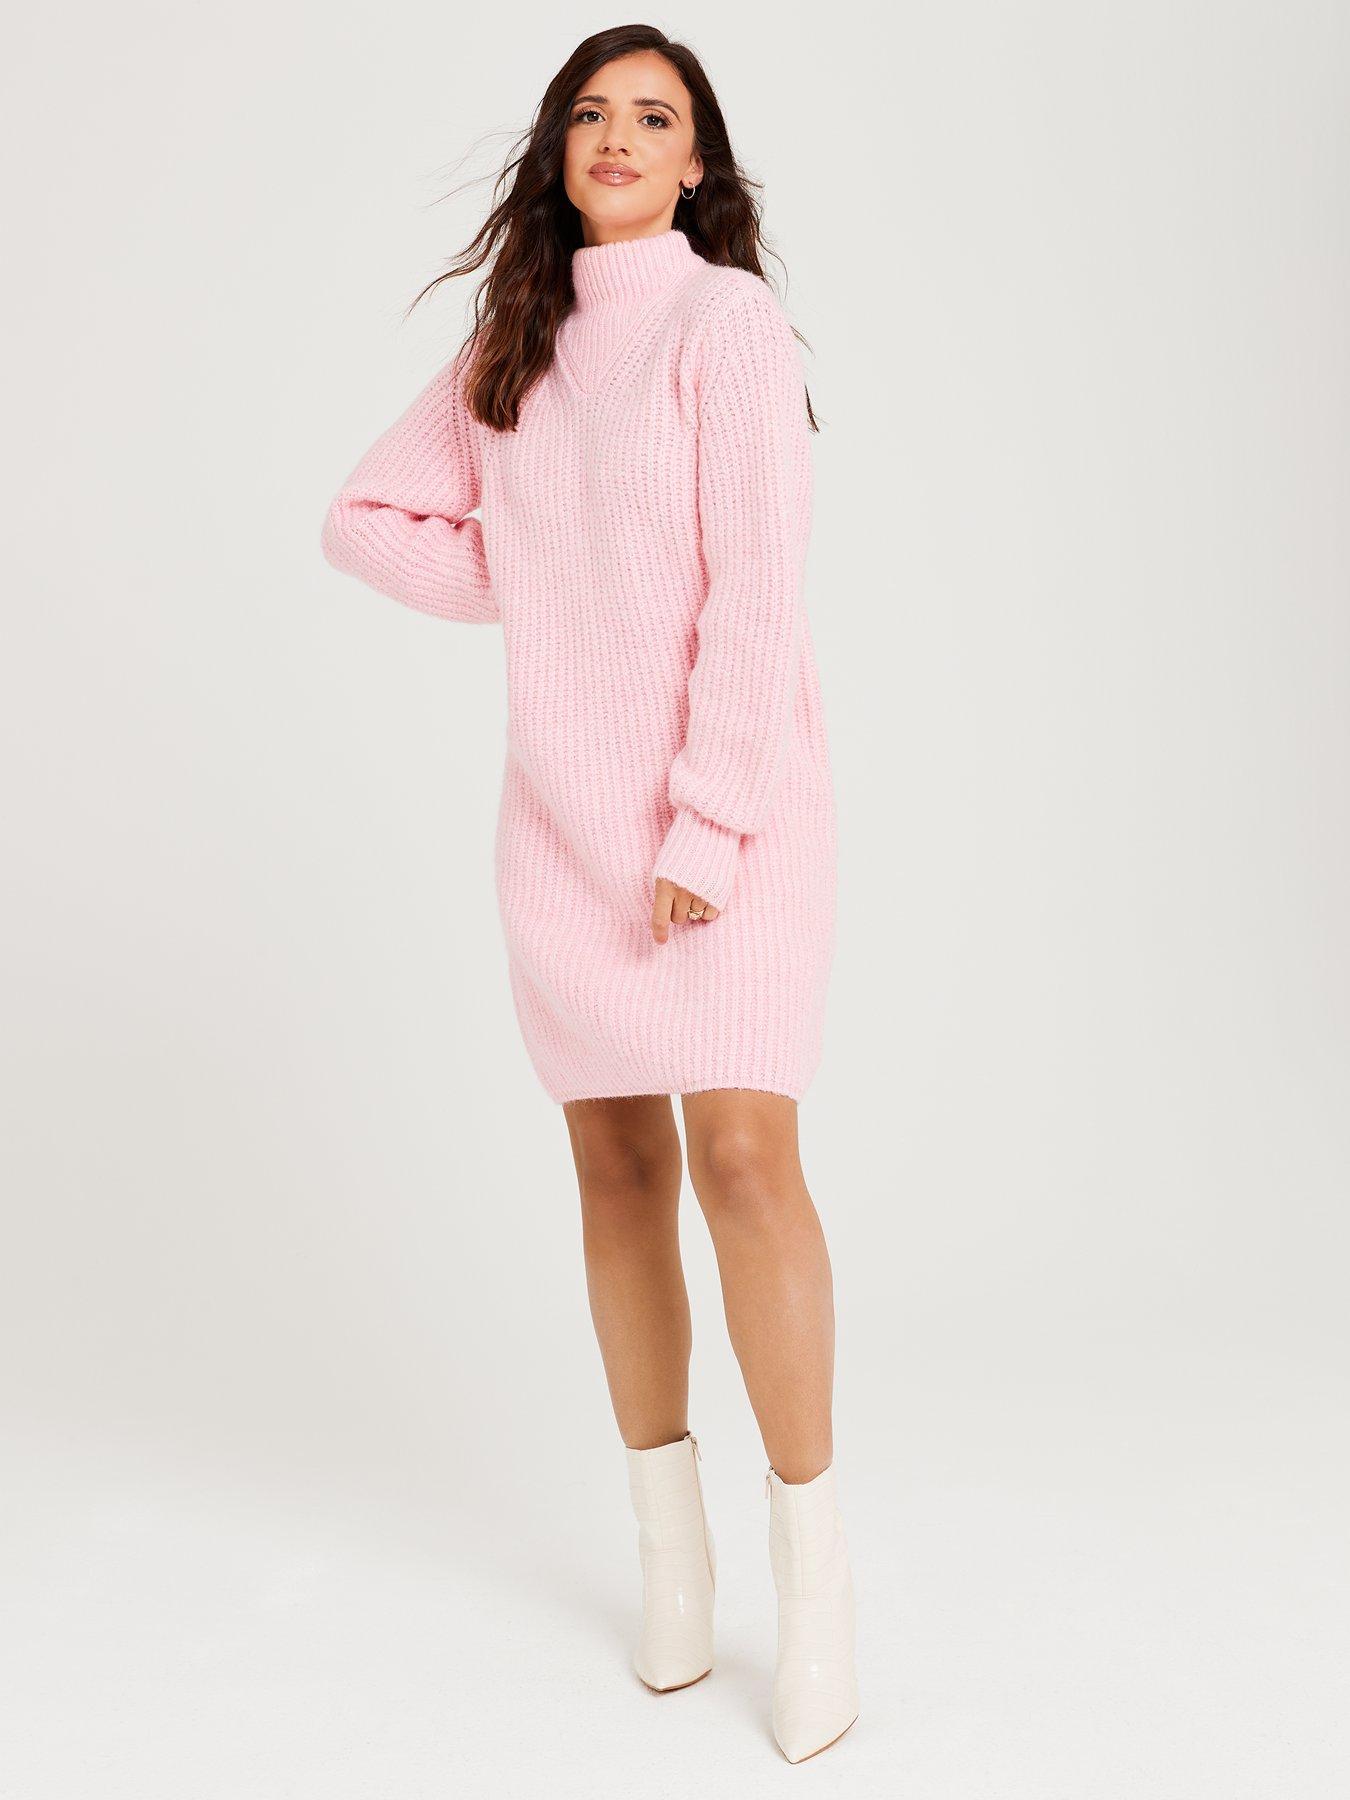 Lucy Mecklenburgh Lucy Mecklenburgh x V by Very High Neck Loose Jumper Dress  - Pink